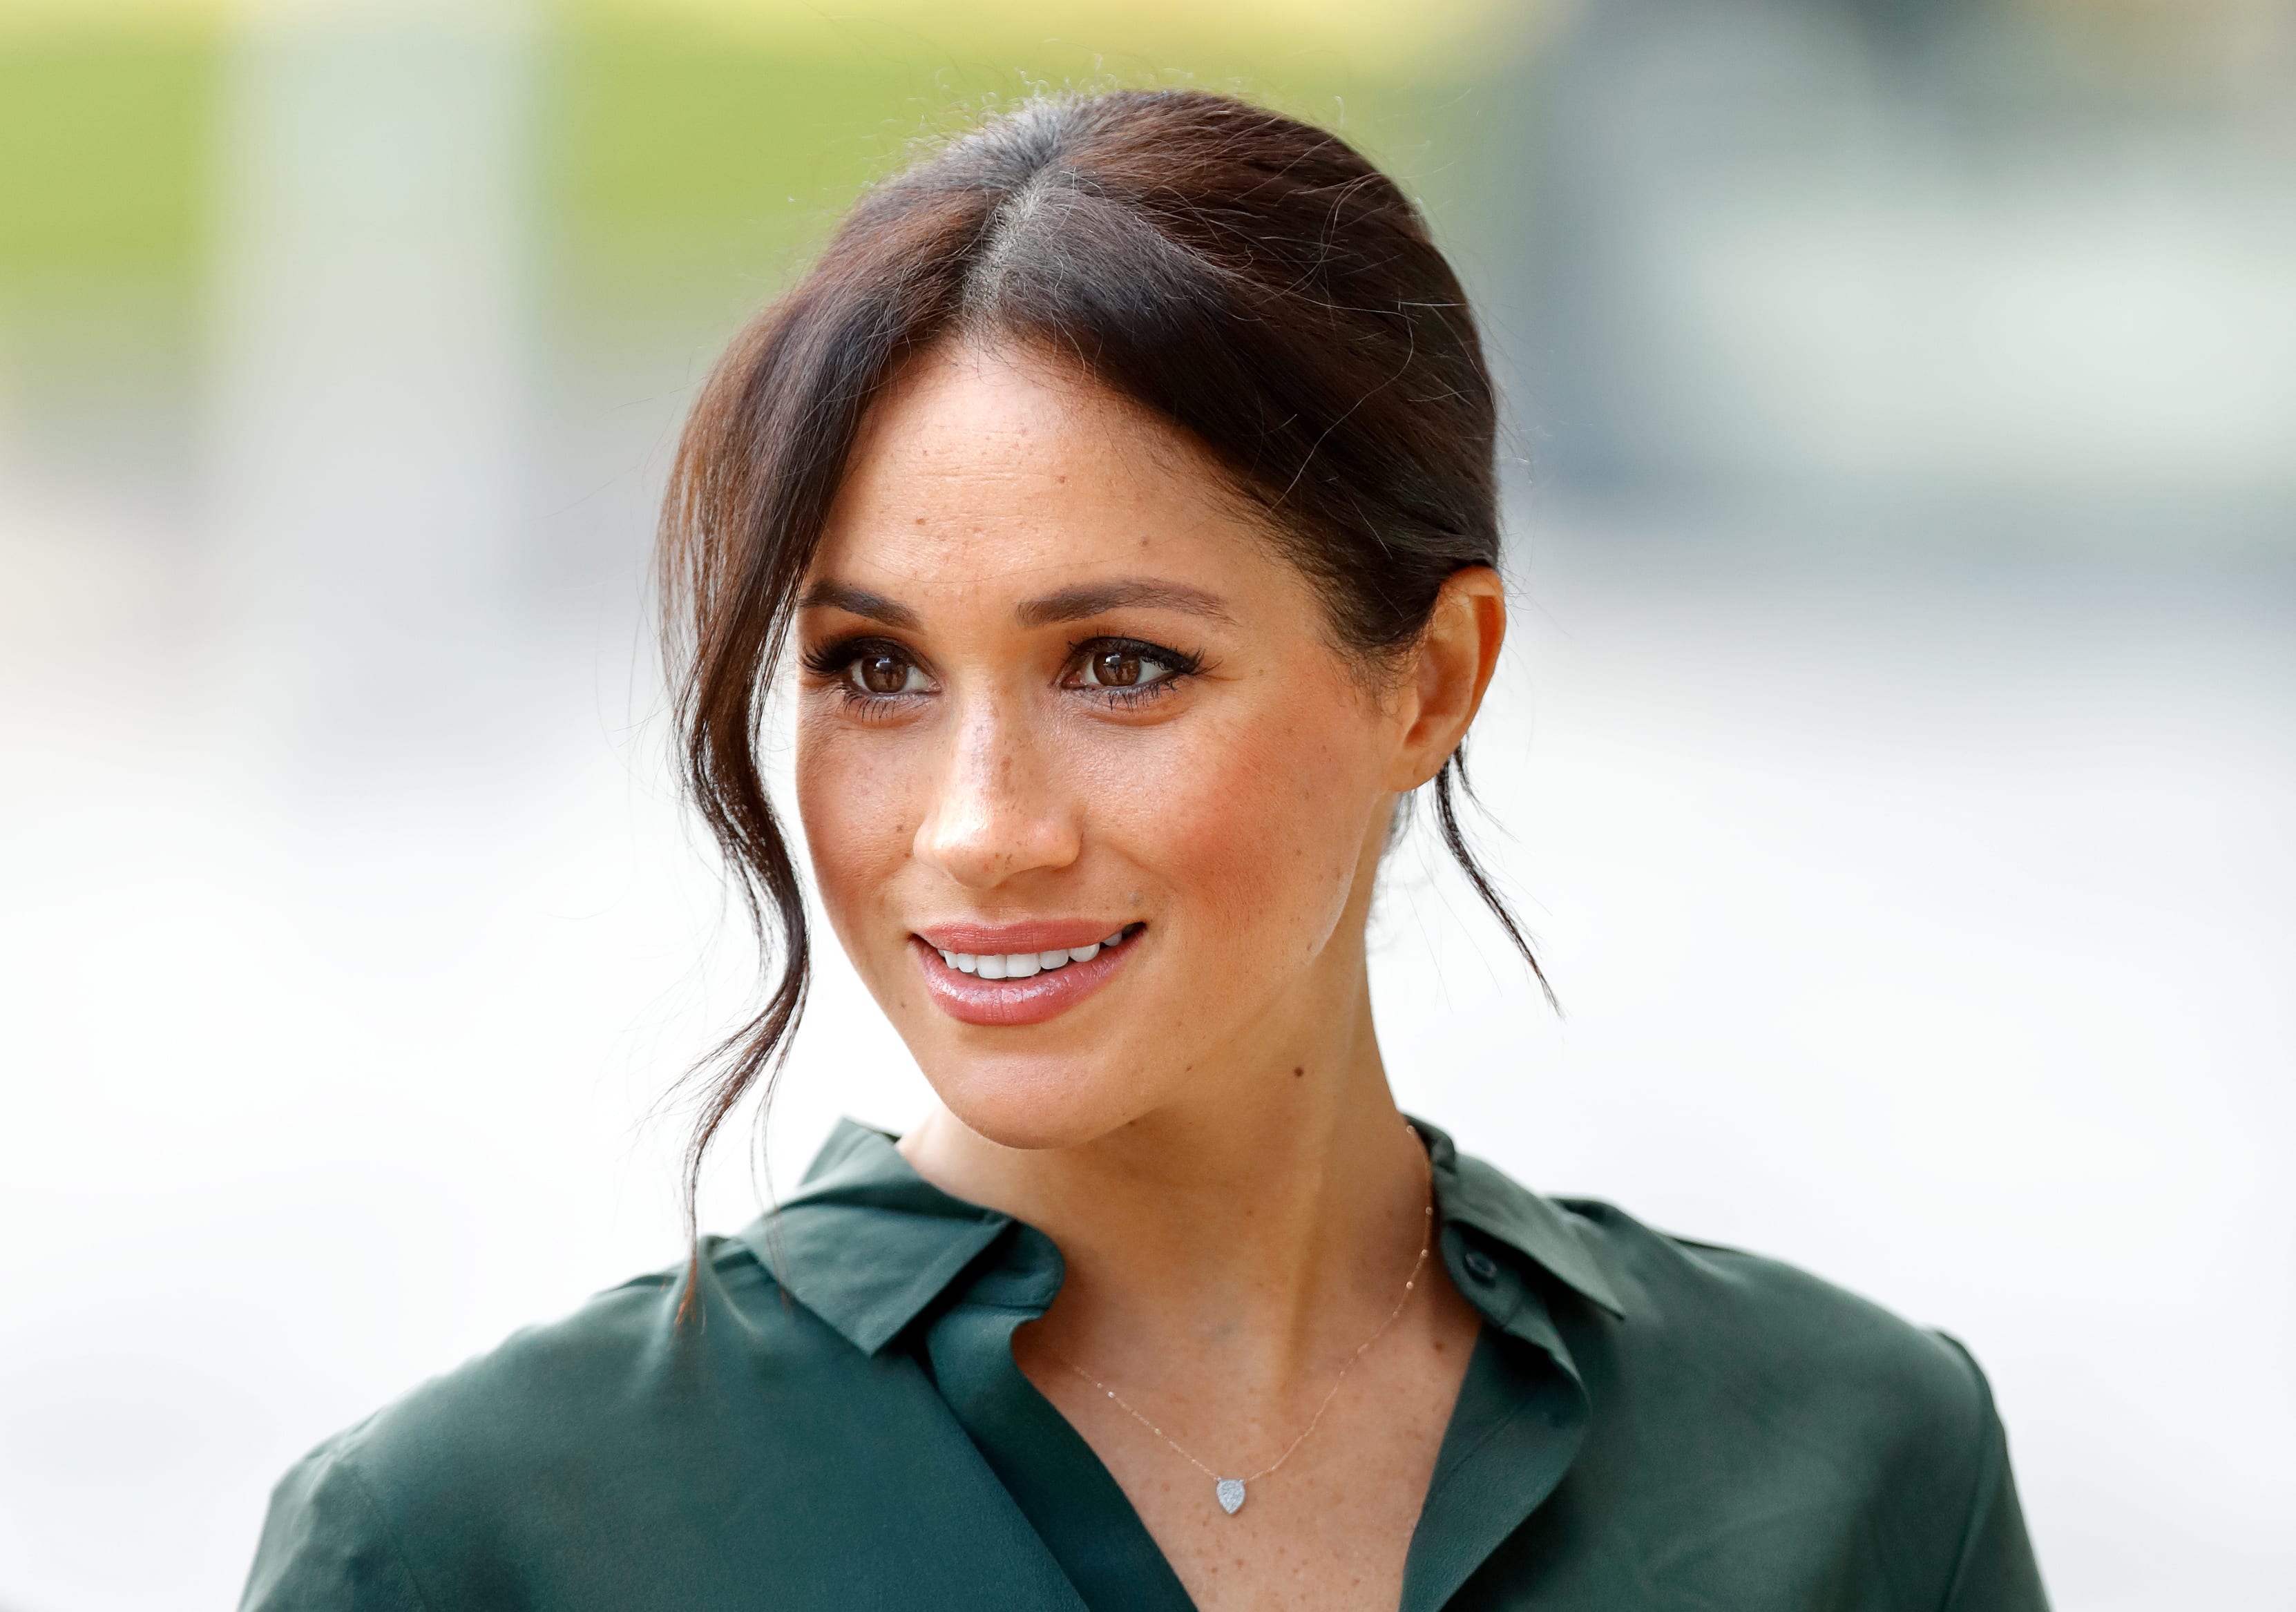 Frontlist | Meghan Markle might be ready to write a book of her own